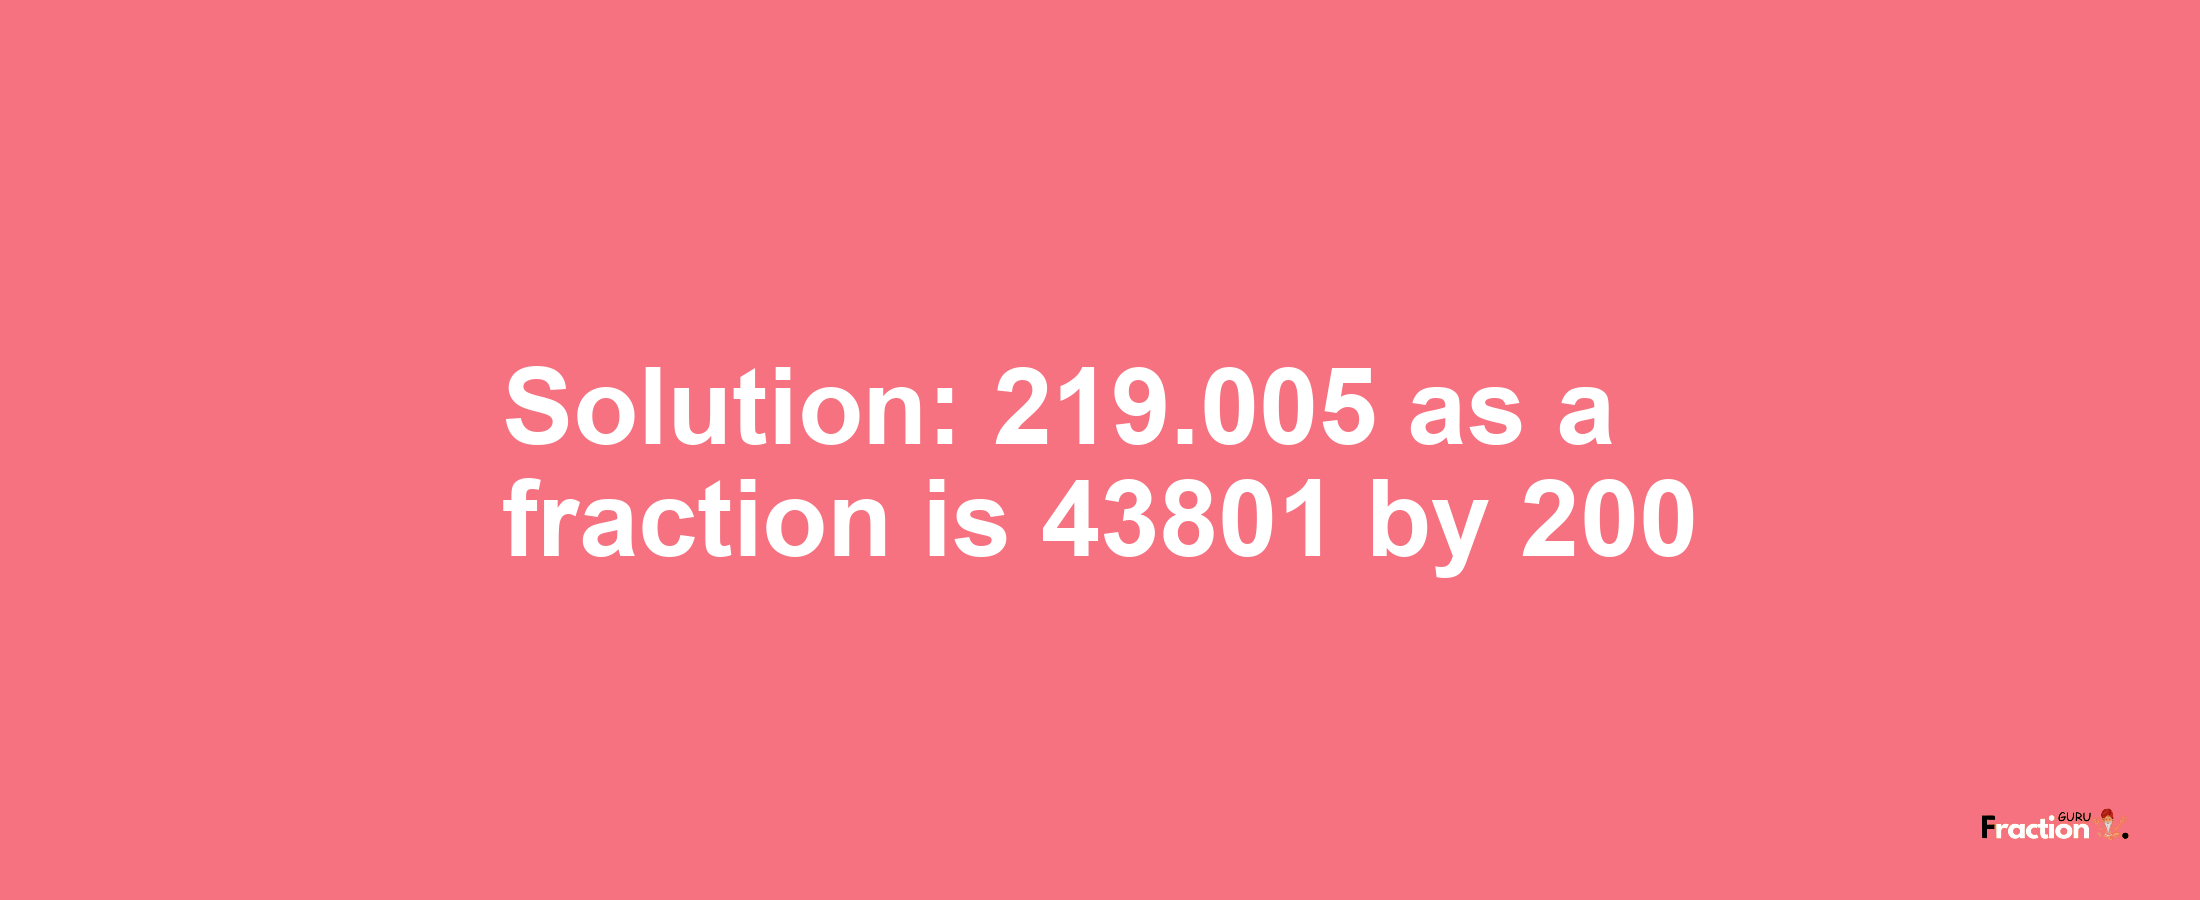 Solution:219.005 as a fraction is 43801/200